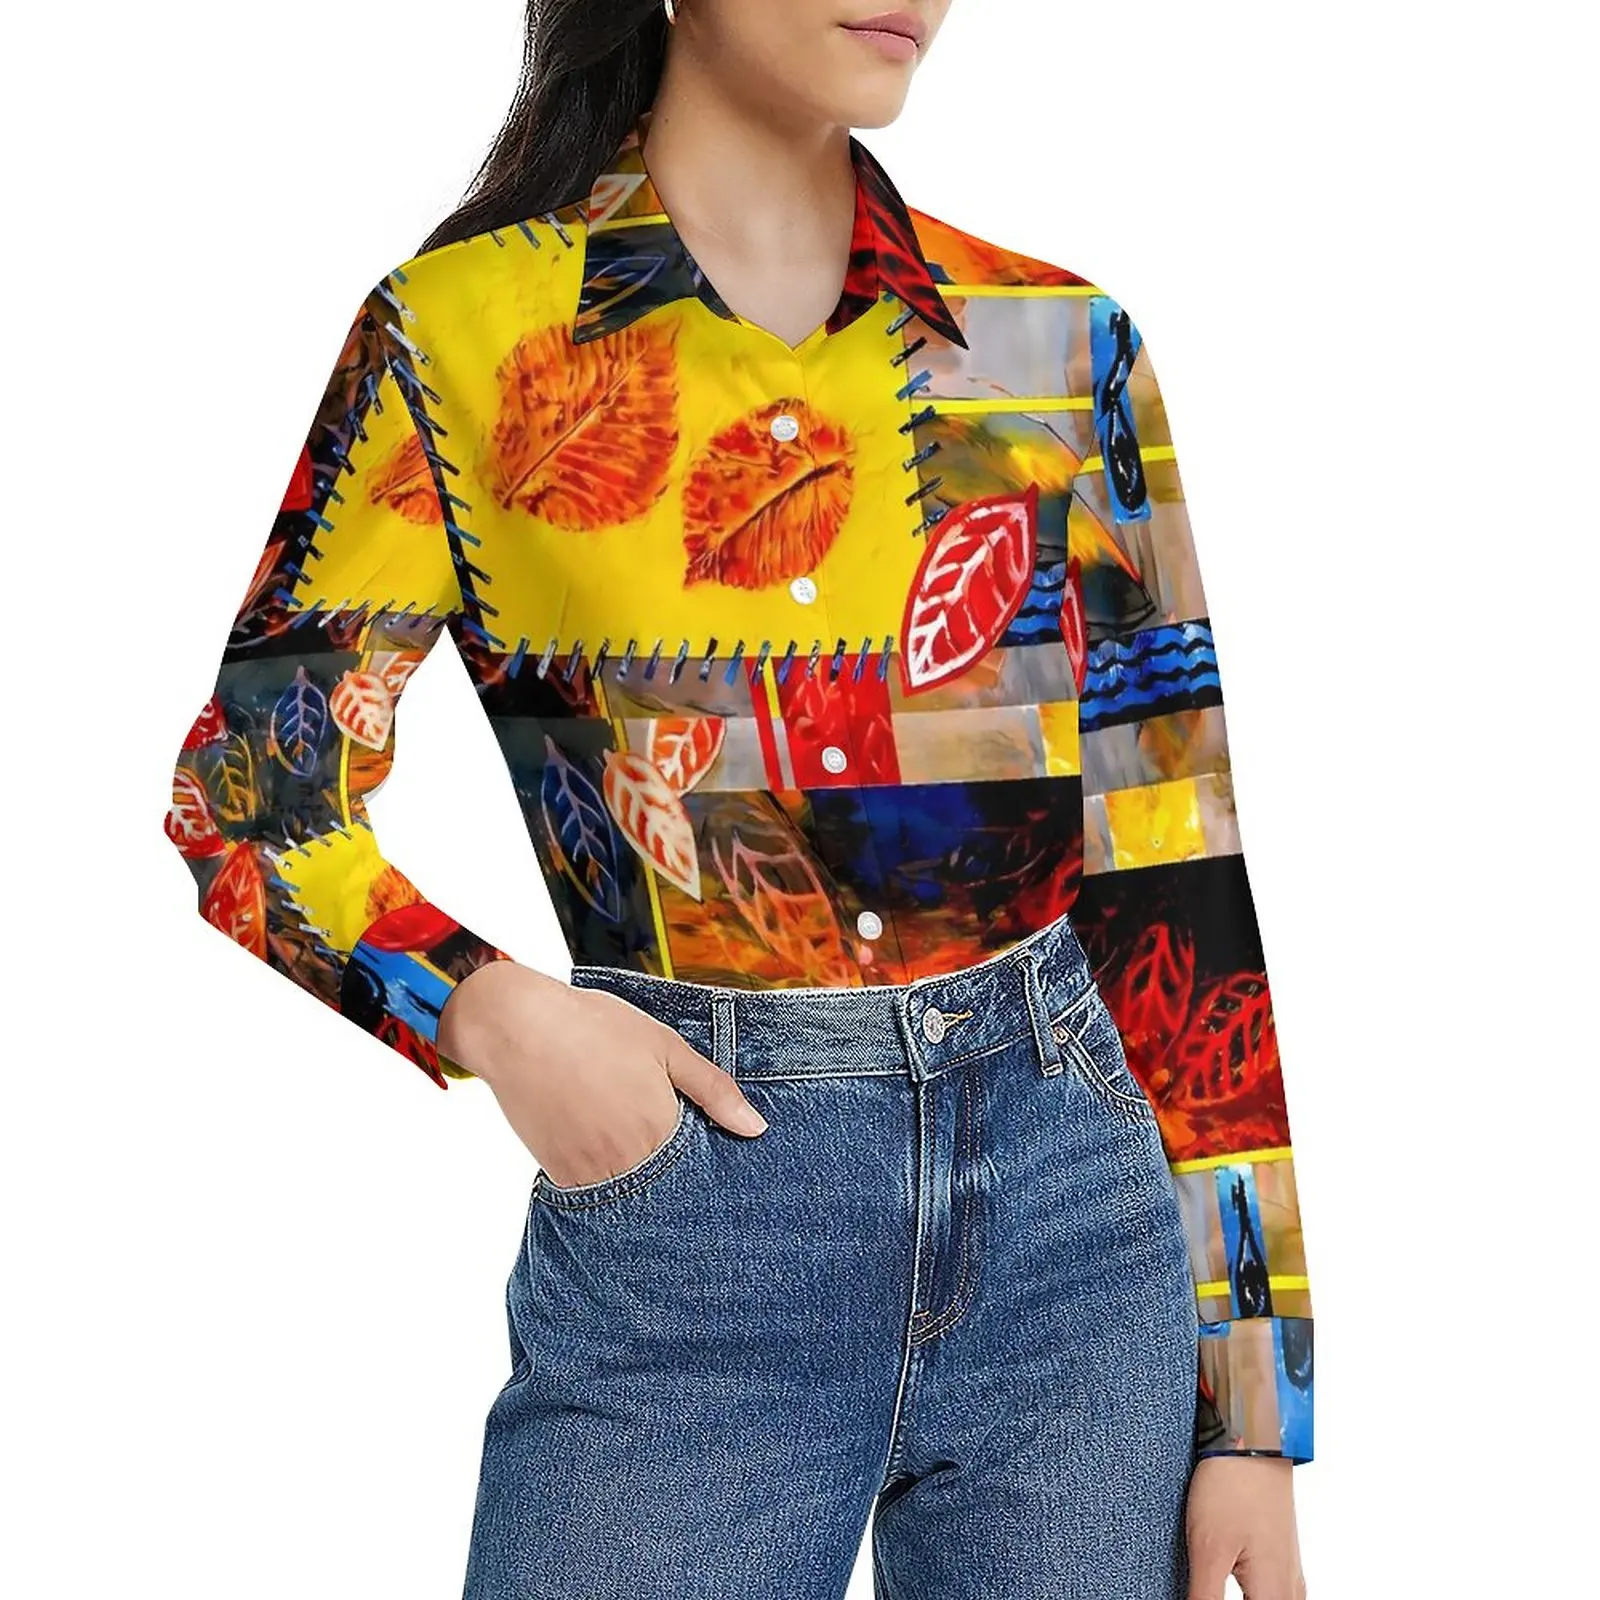 

Patchwork Print Loose Blouse Red Leaves Casual Oversize Blouses Women Long-Sleeve Retro Shirt Summer Design Top